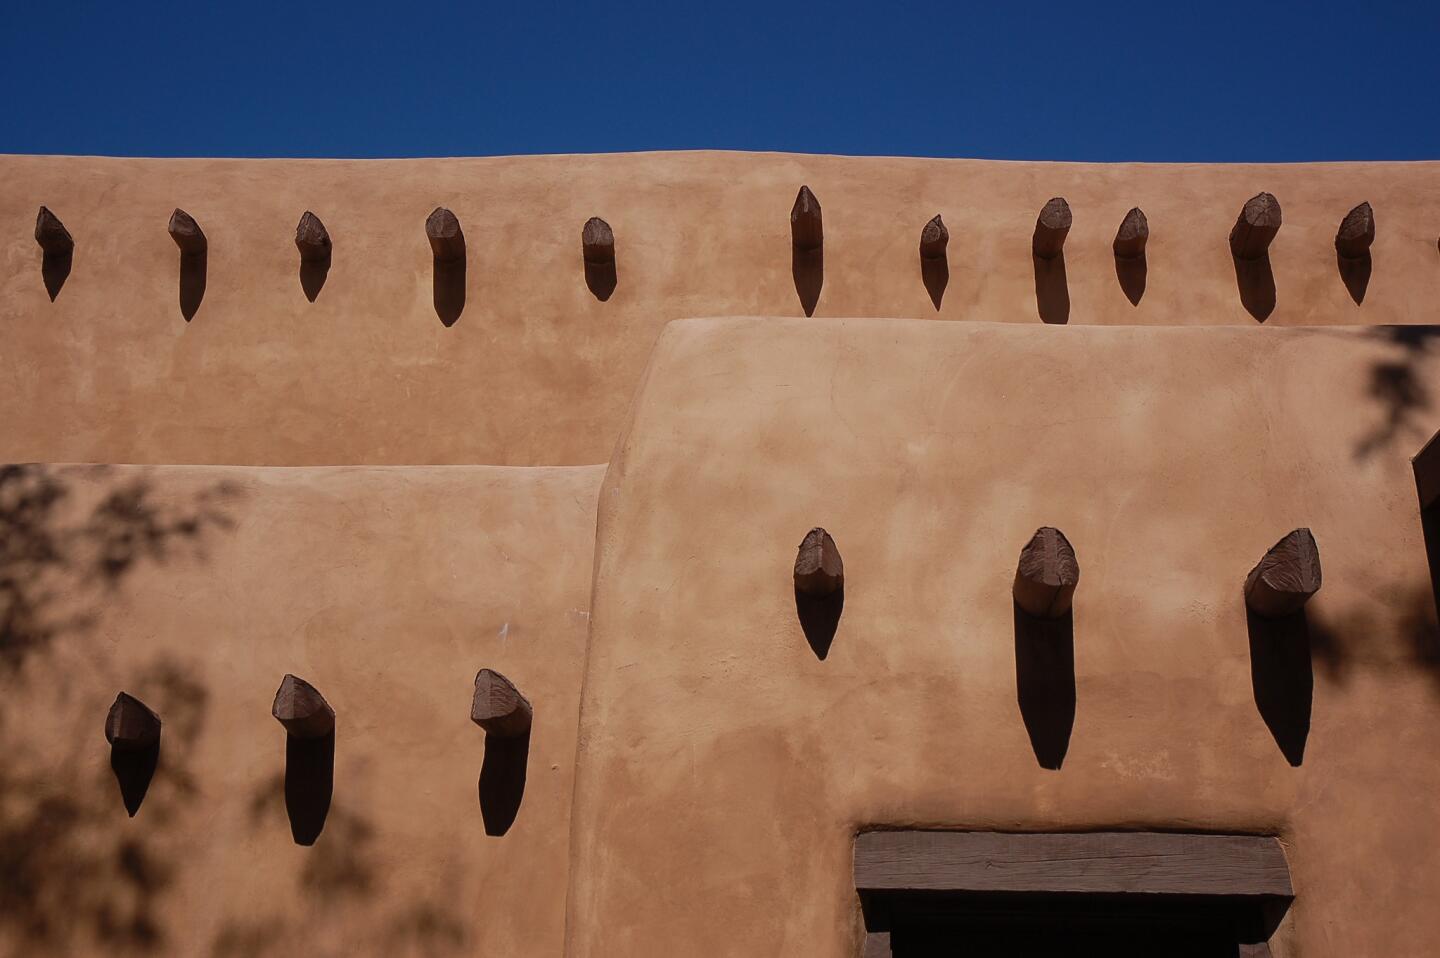 New Mexico: A copy of a knockoff of a facsimile